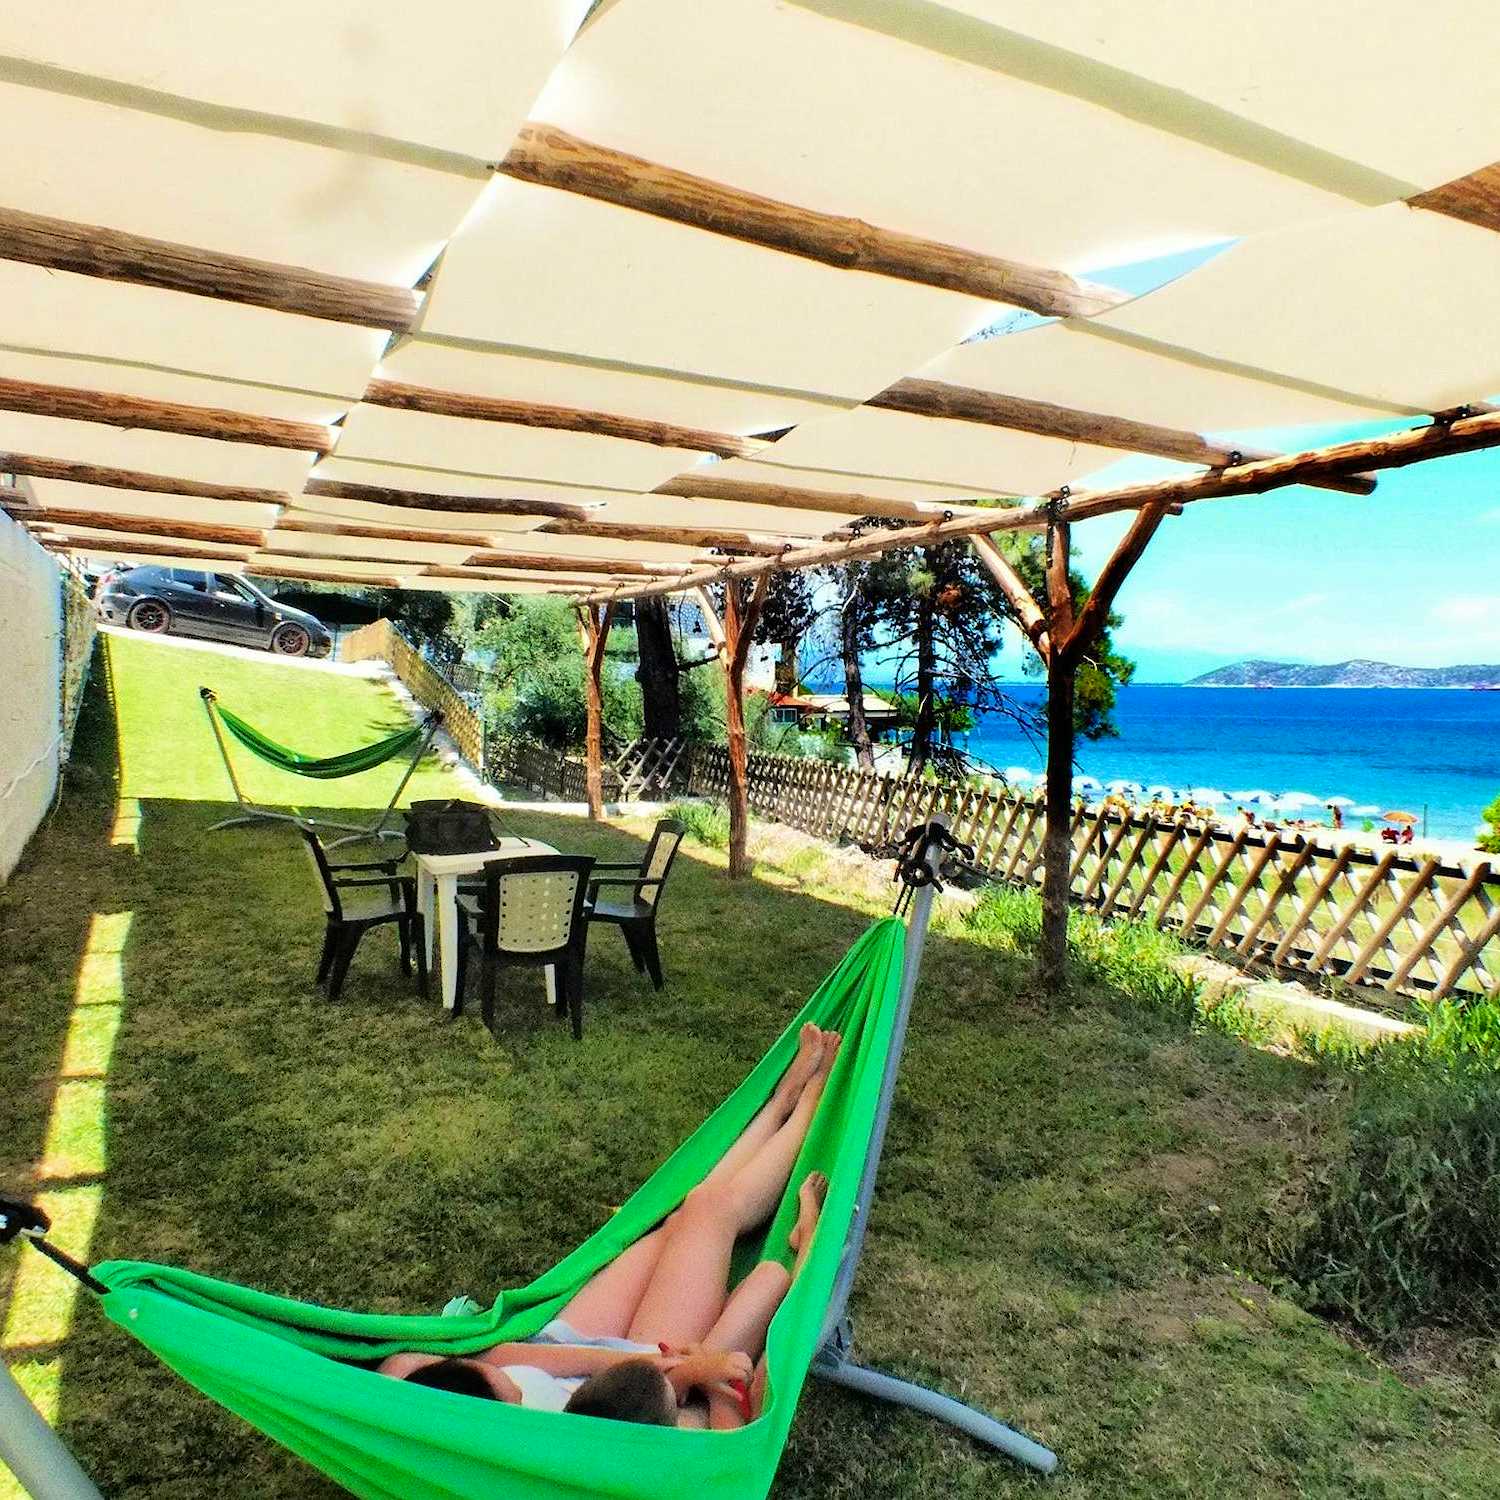 Photo Caption: Relax in the hammock with a sea breeze, read a book, or take a nap